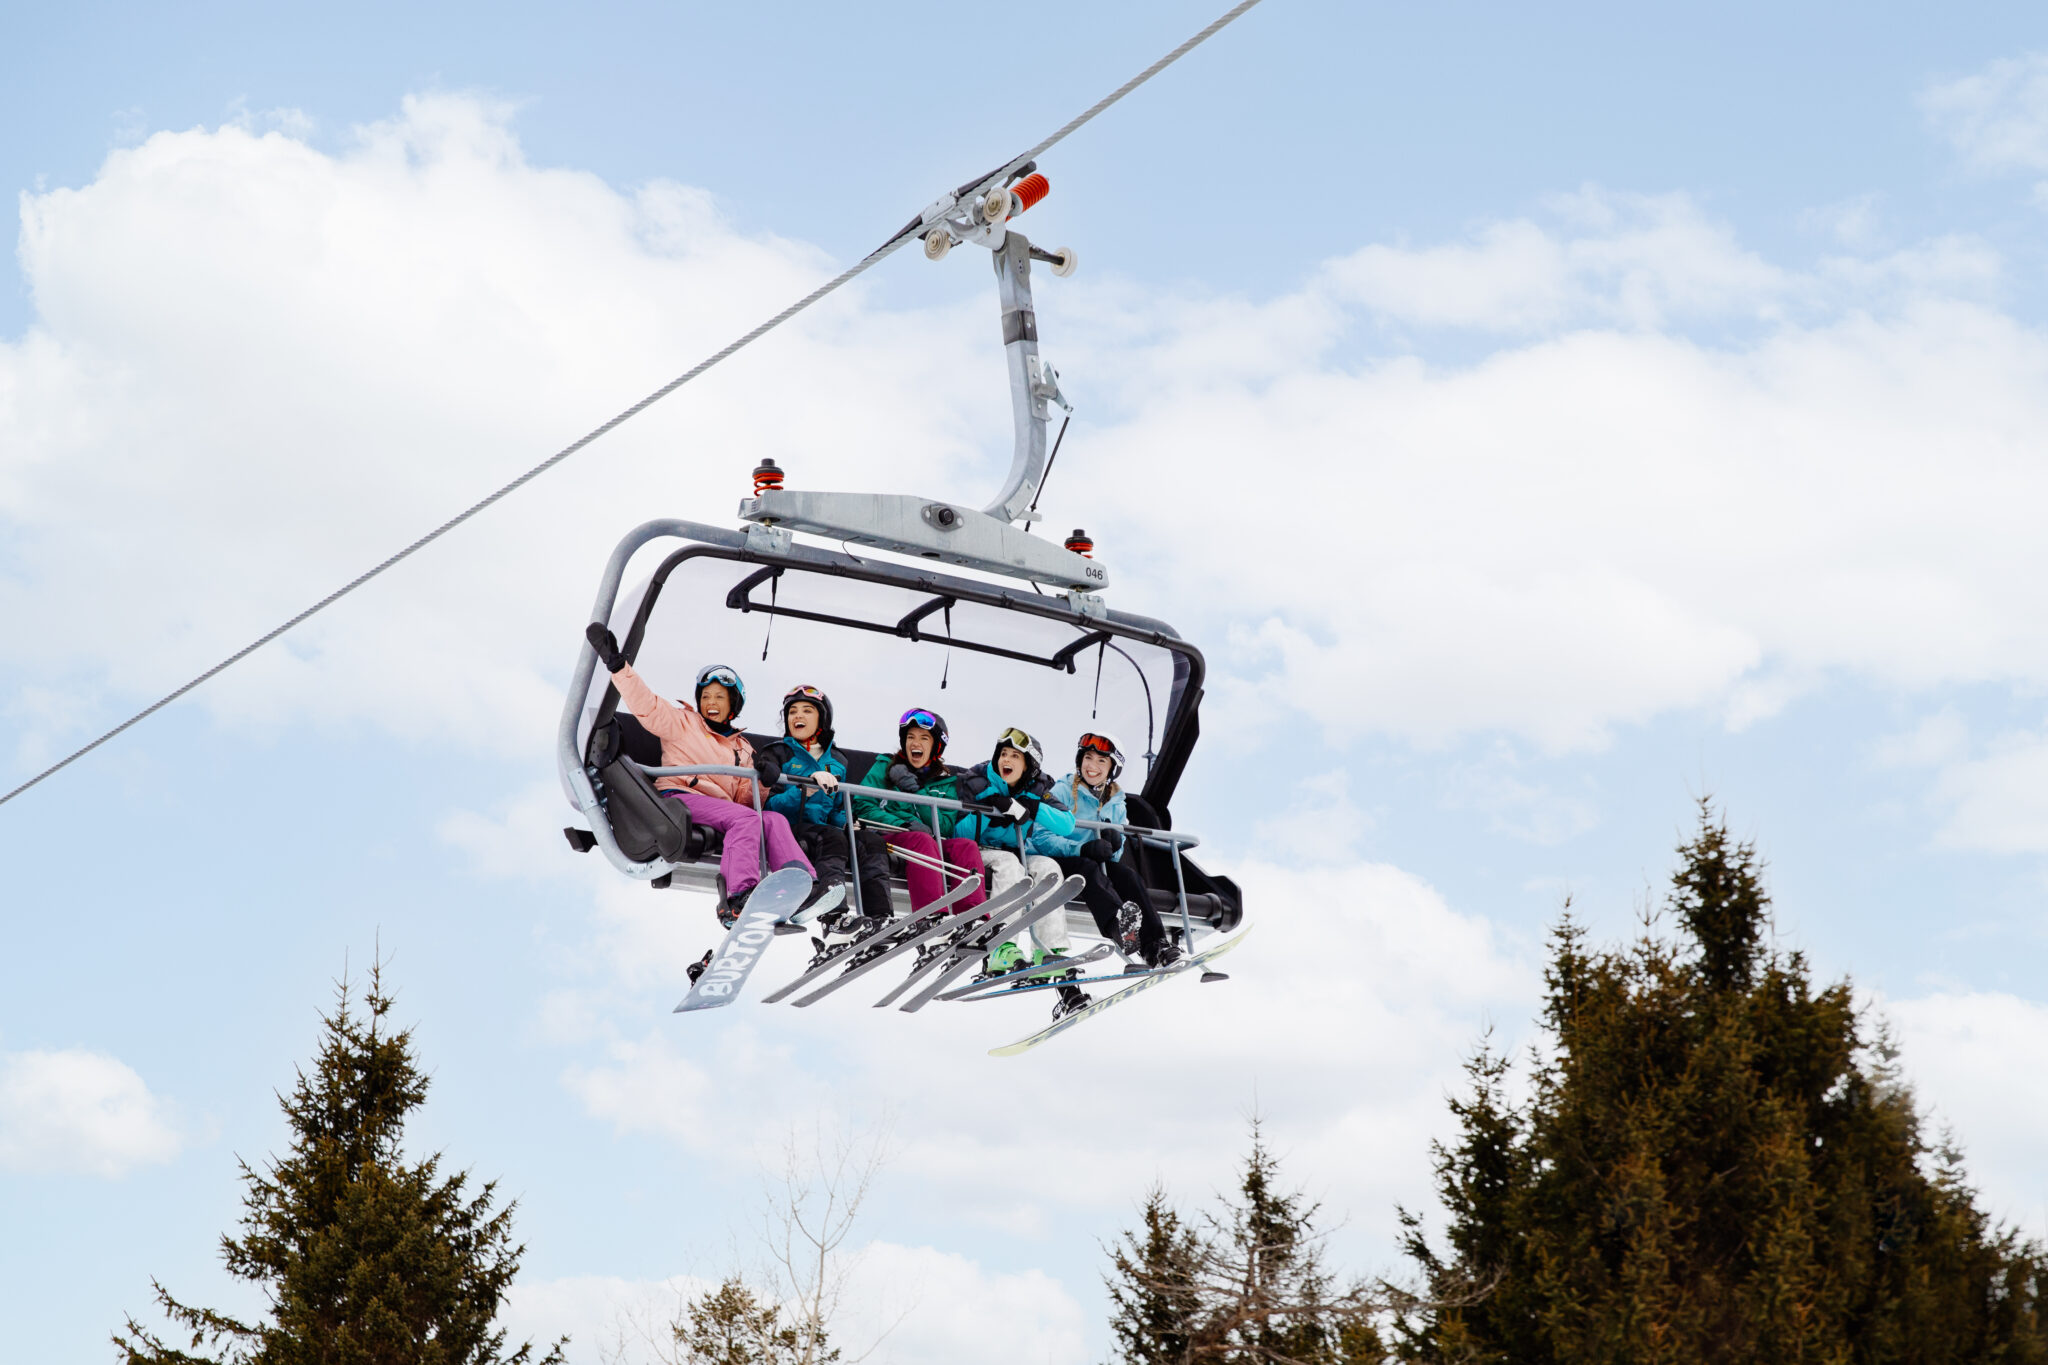 Camelback to offer free season passes to disadvantaged youth